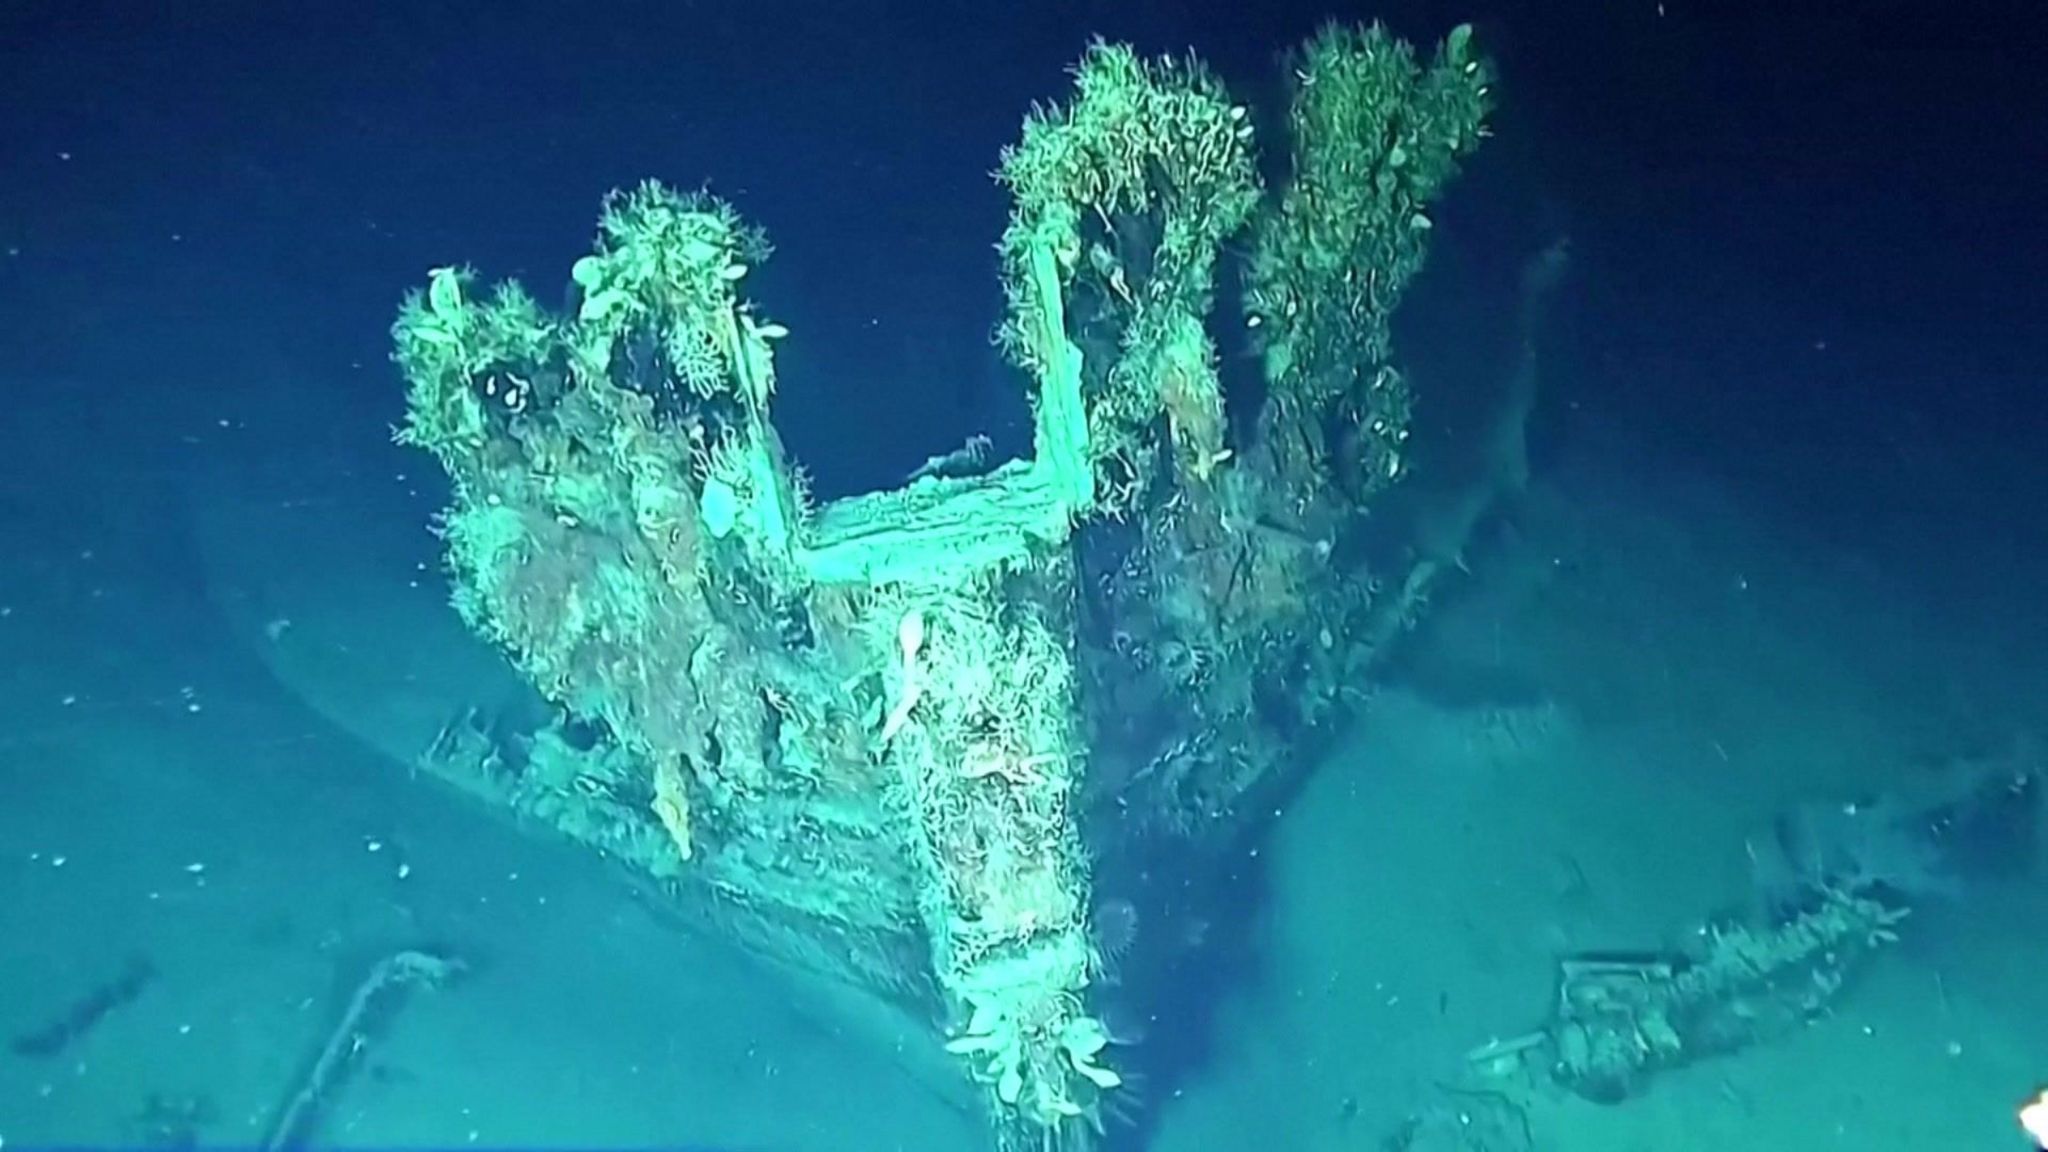 The front of the San José shipwreck seen underwater